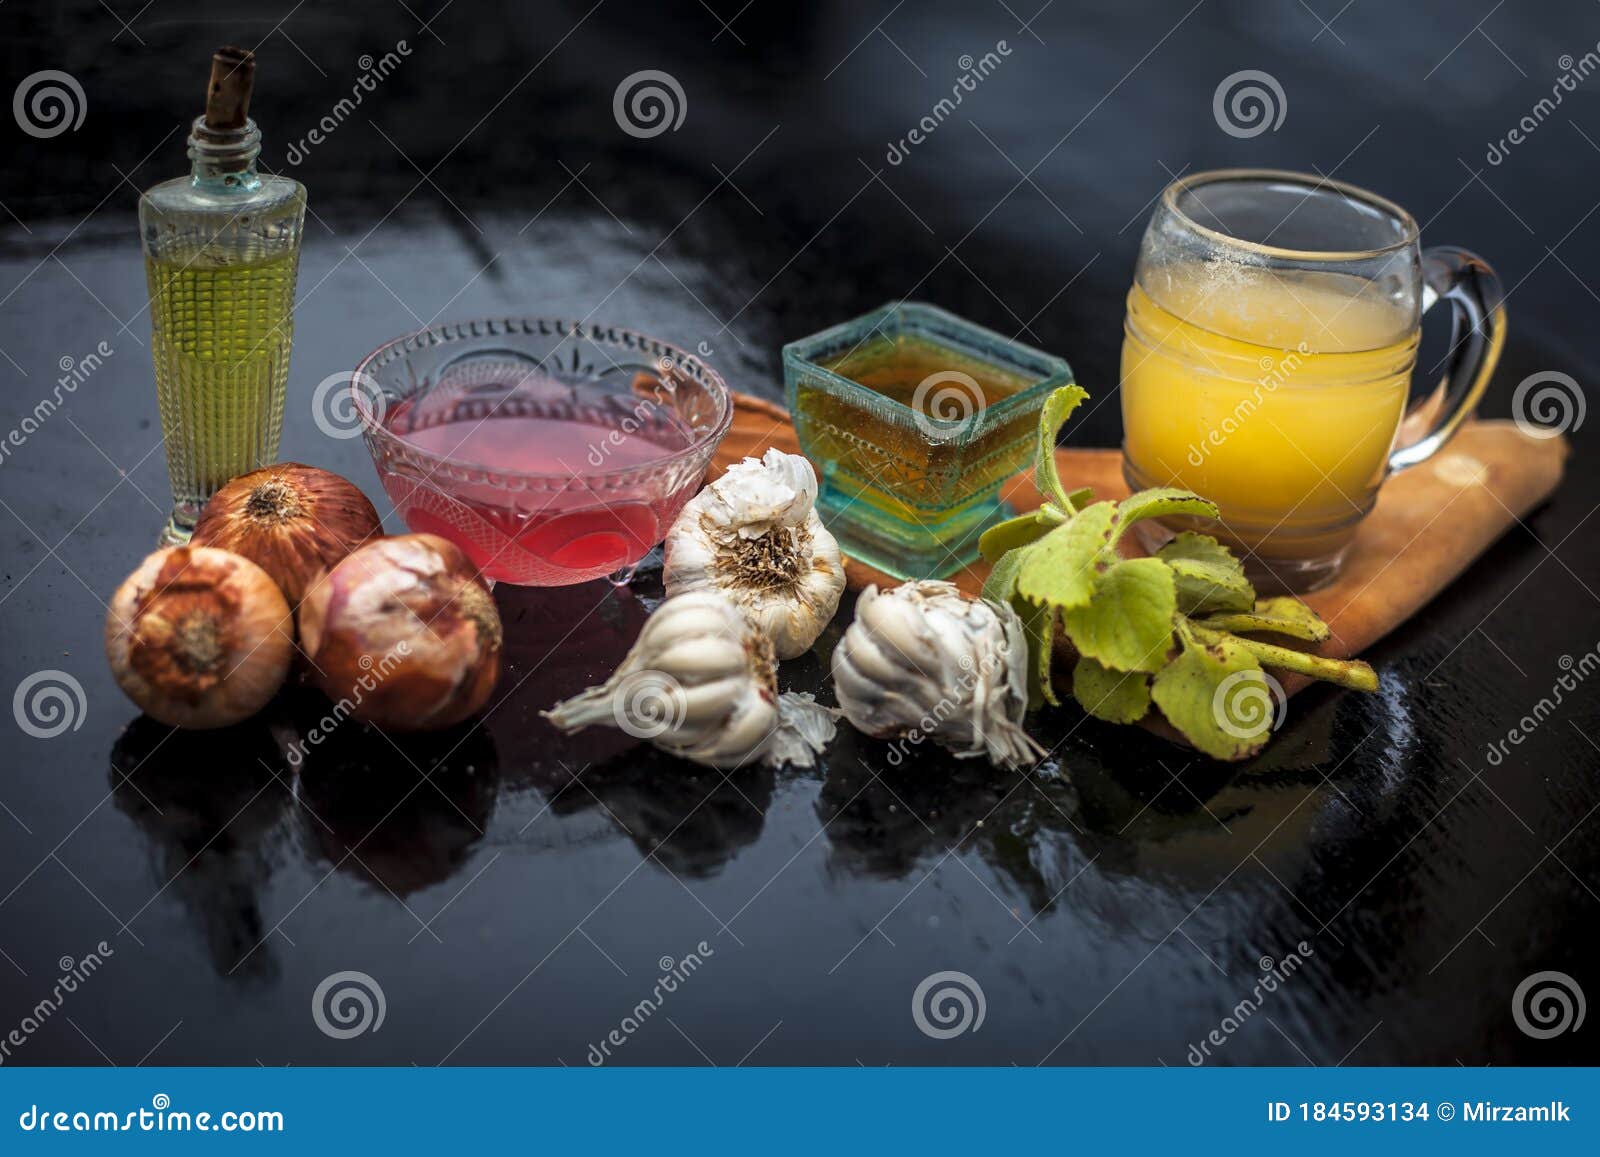 Close Up of Hair Treatment or Remedy To Increase Hair Growth Instantly  Consisting of Onion Juice, Garlic Juice and Olive Oil in a Stock Photo -  Image of health, beauty: 184593134